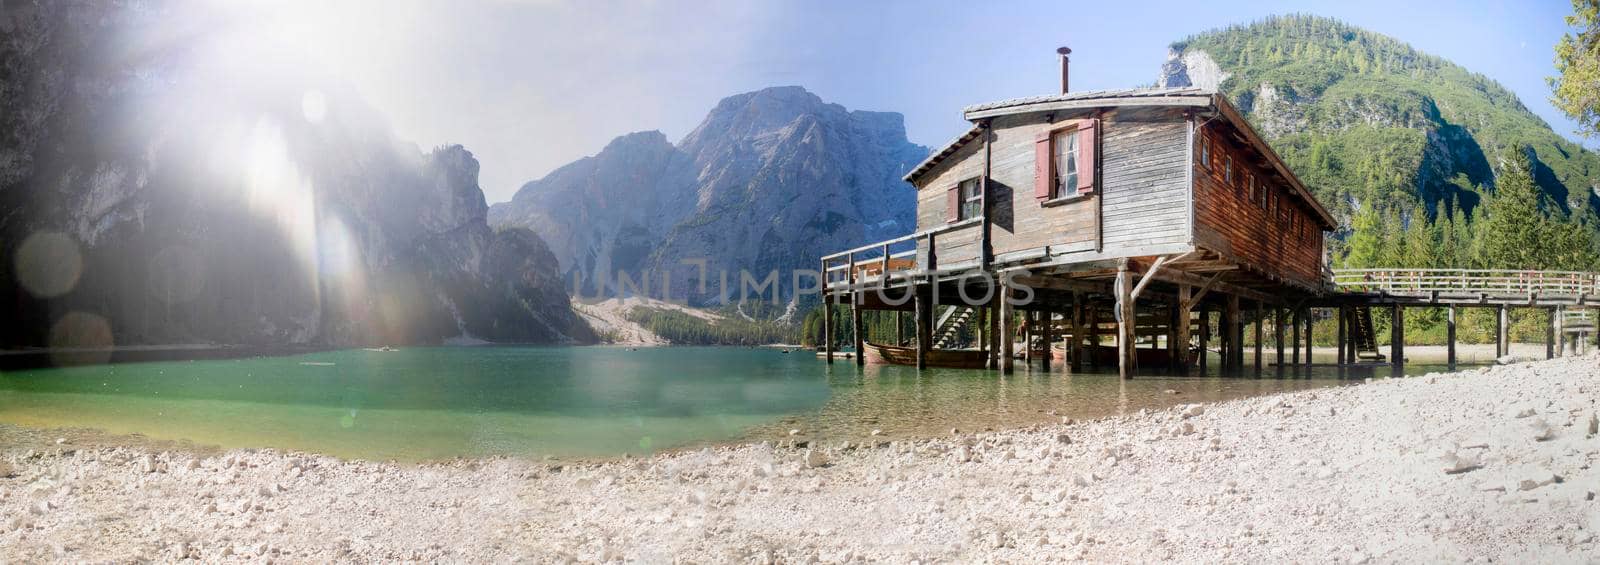 Panoramic view of the stilt house on Lake Braies Dolomites Italy  by fotografiche.eu